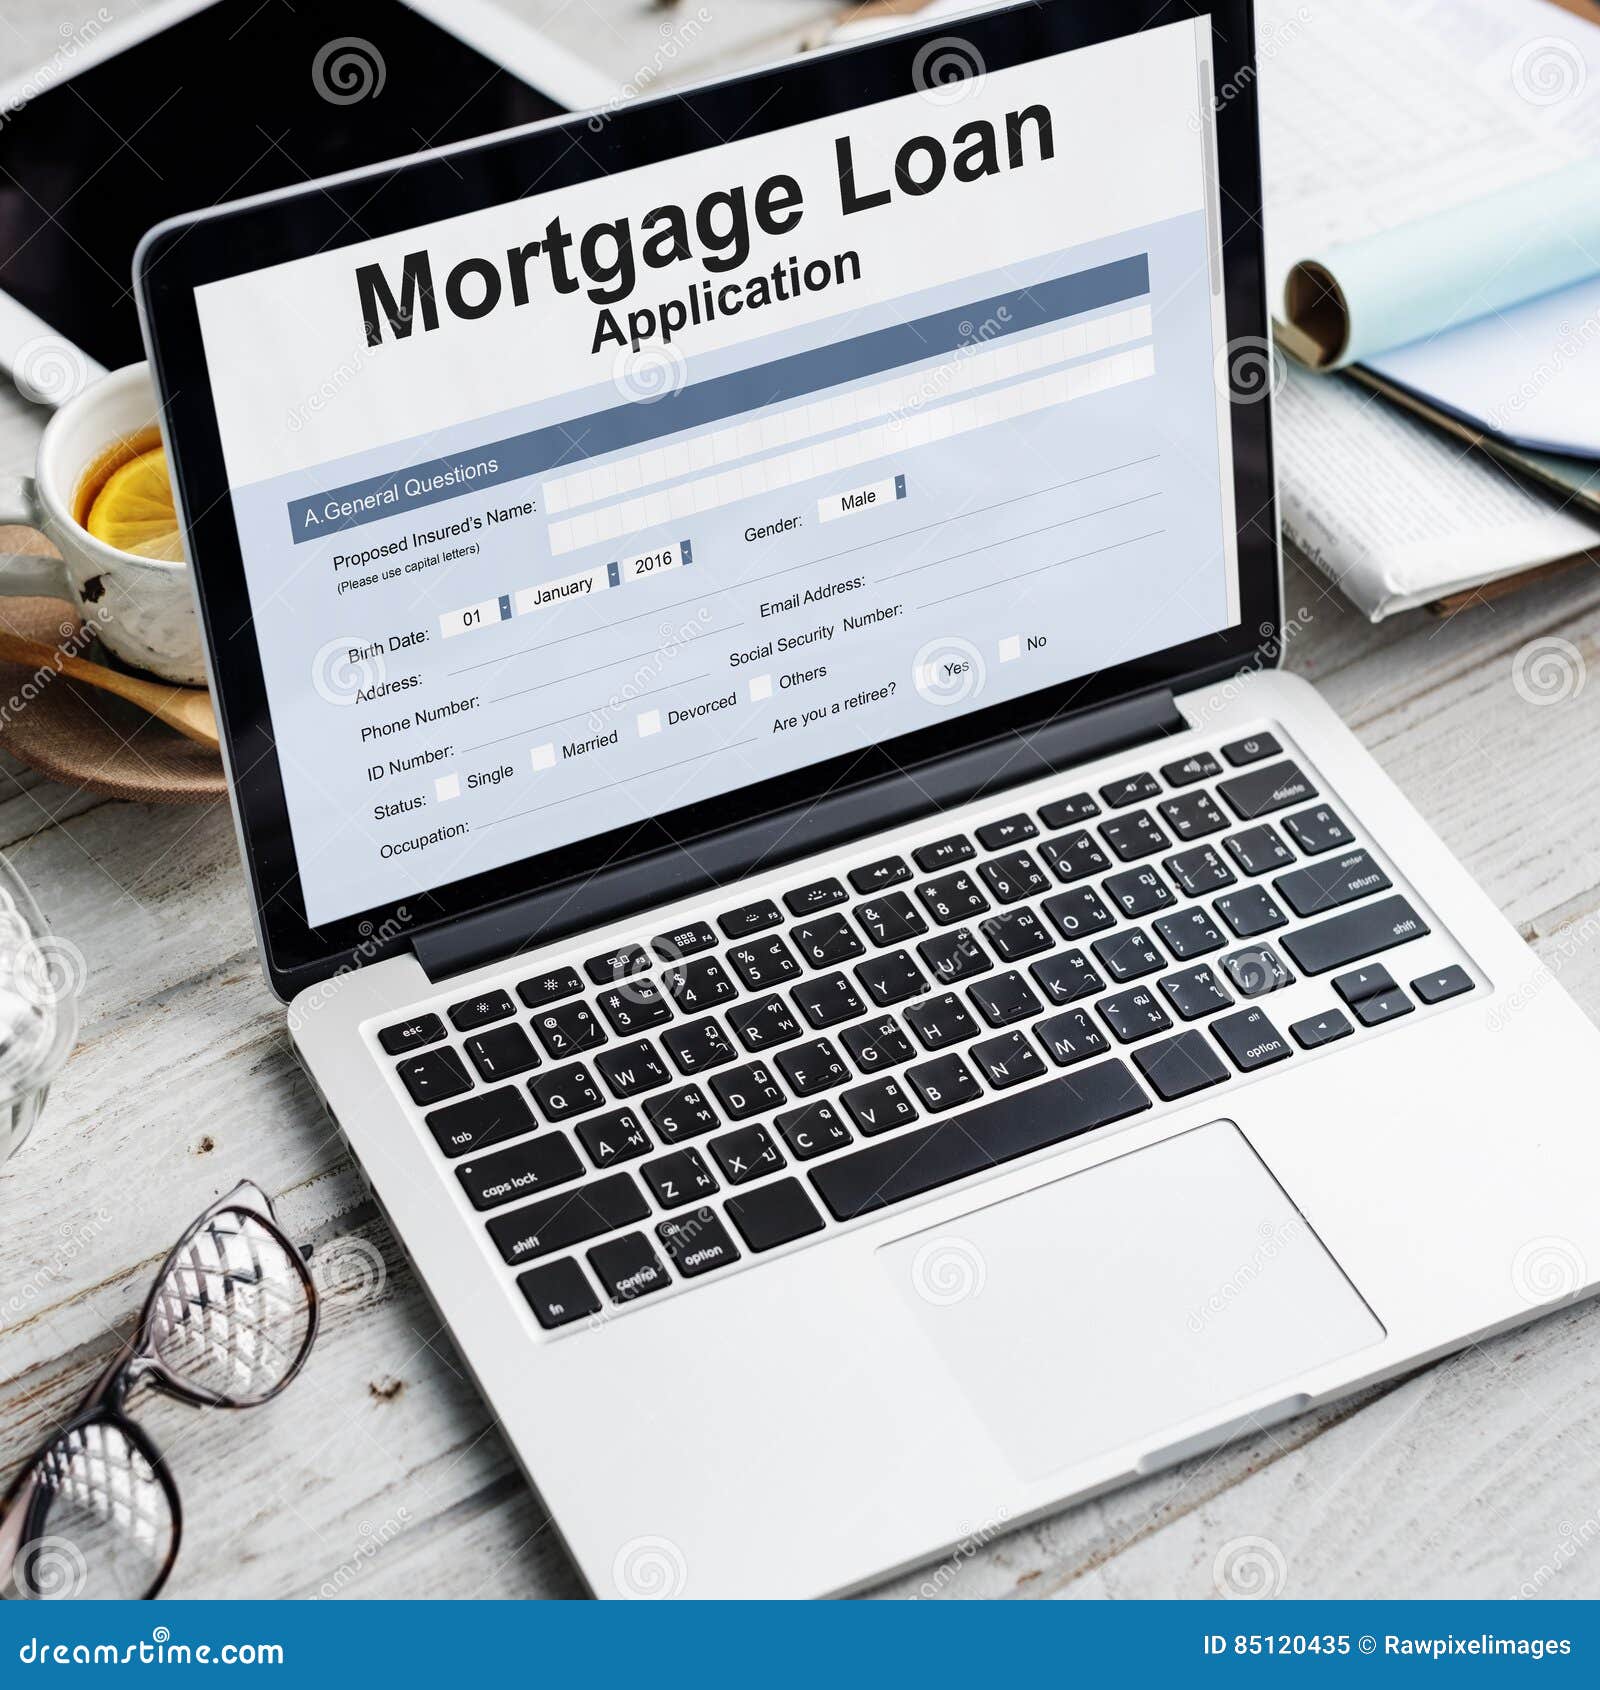 Mortgage Loan Application Form Concept Stock Image Image Of